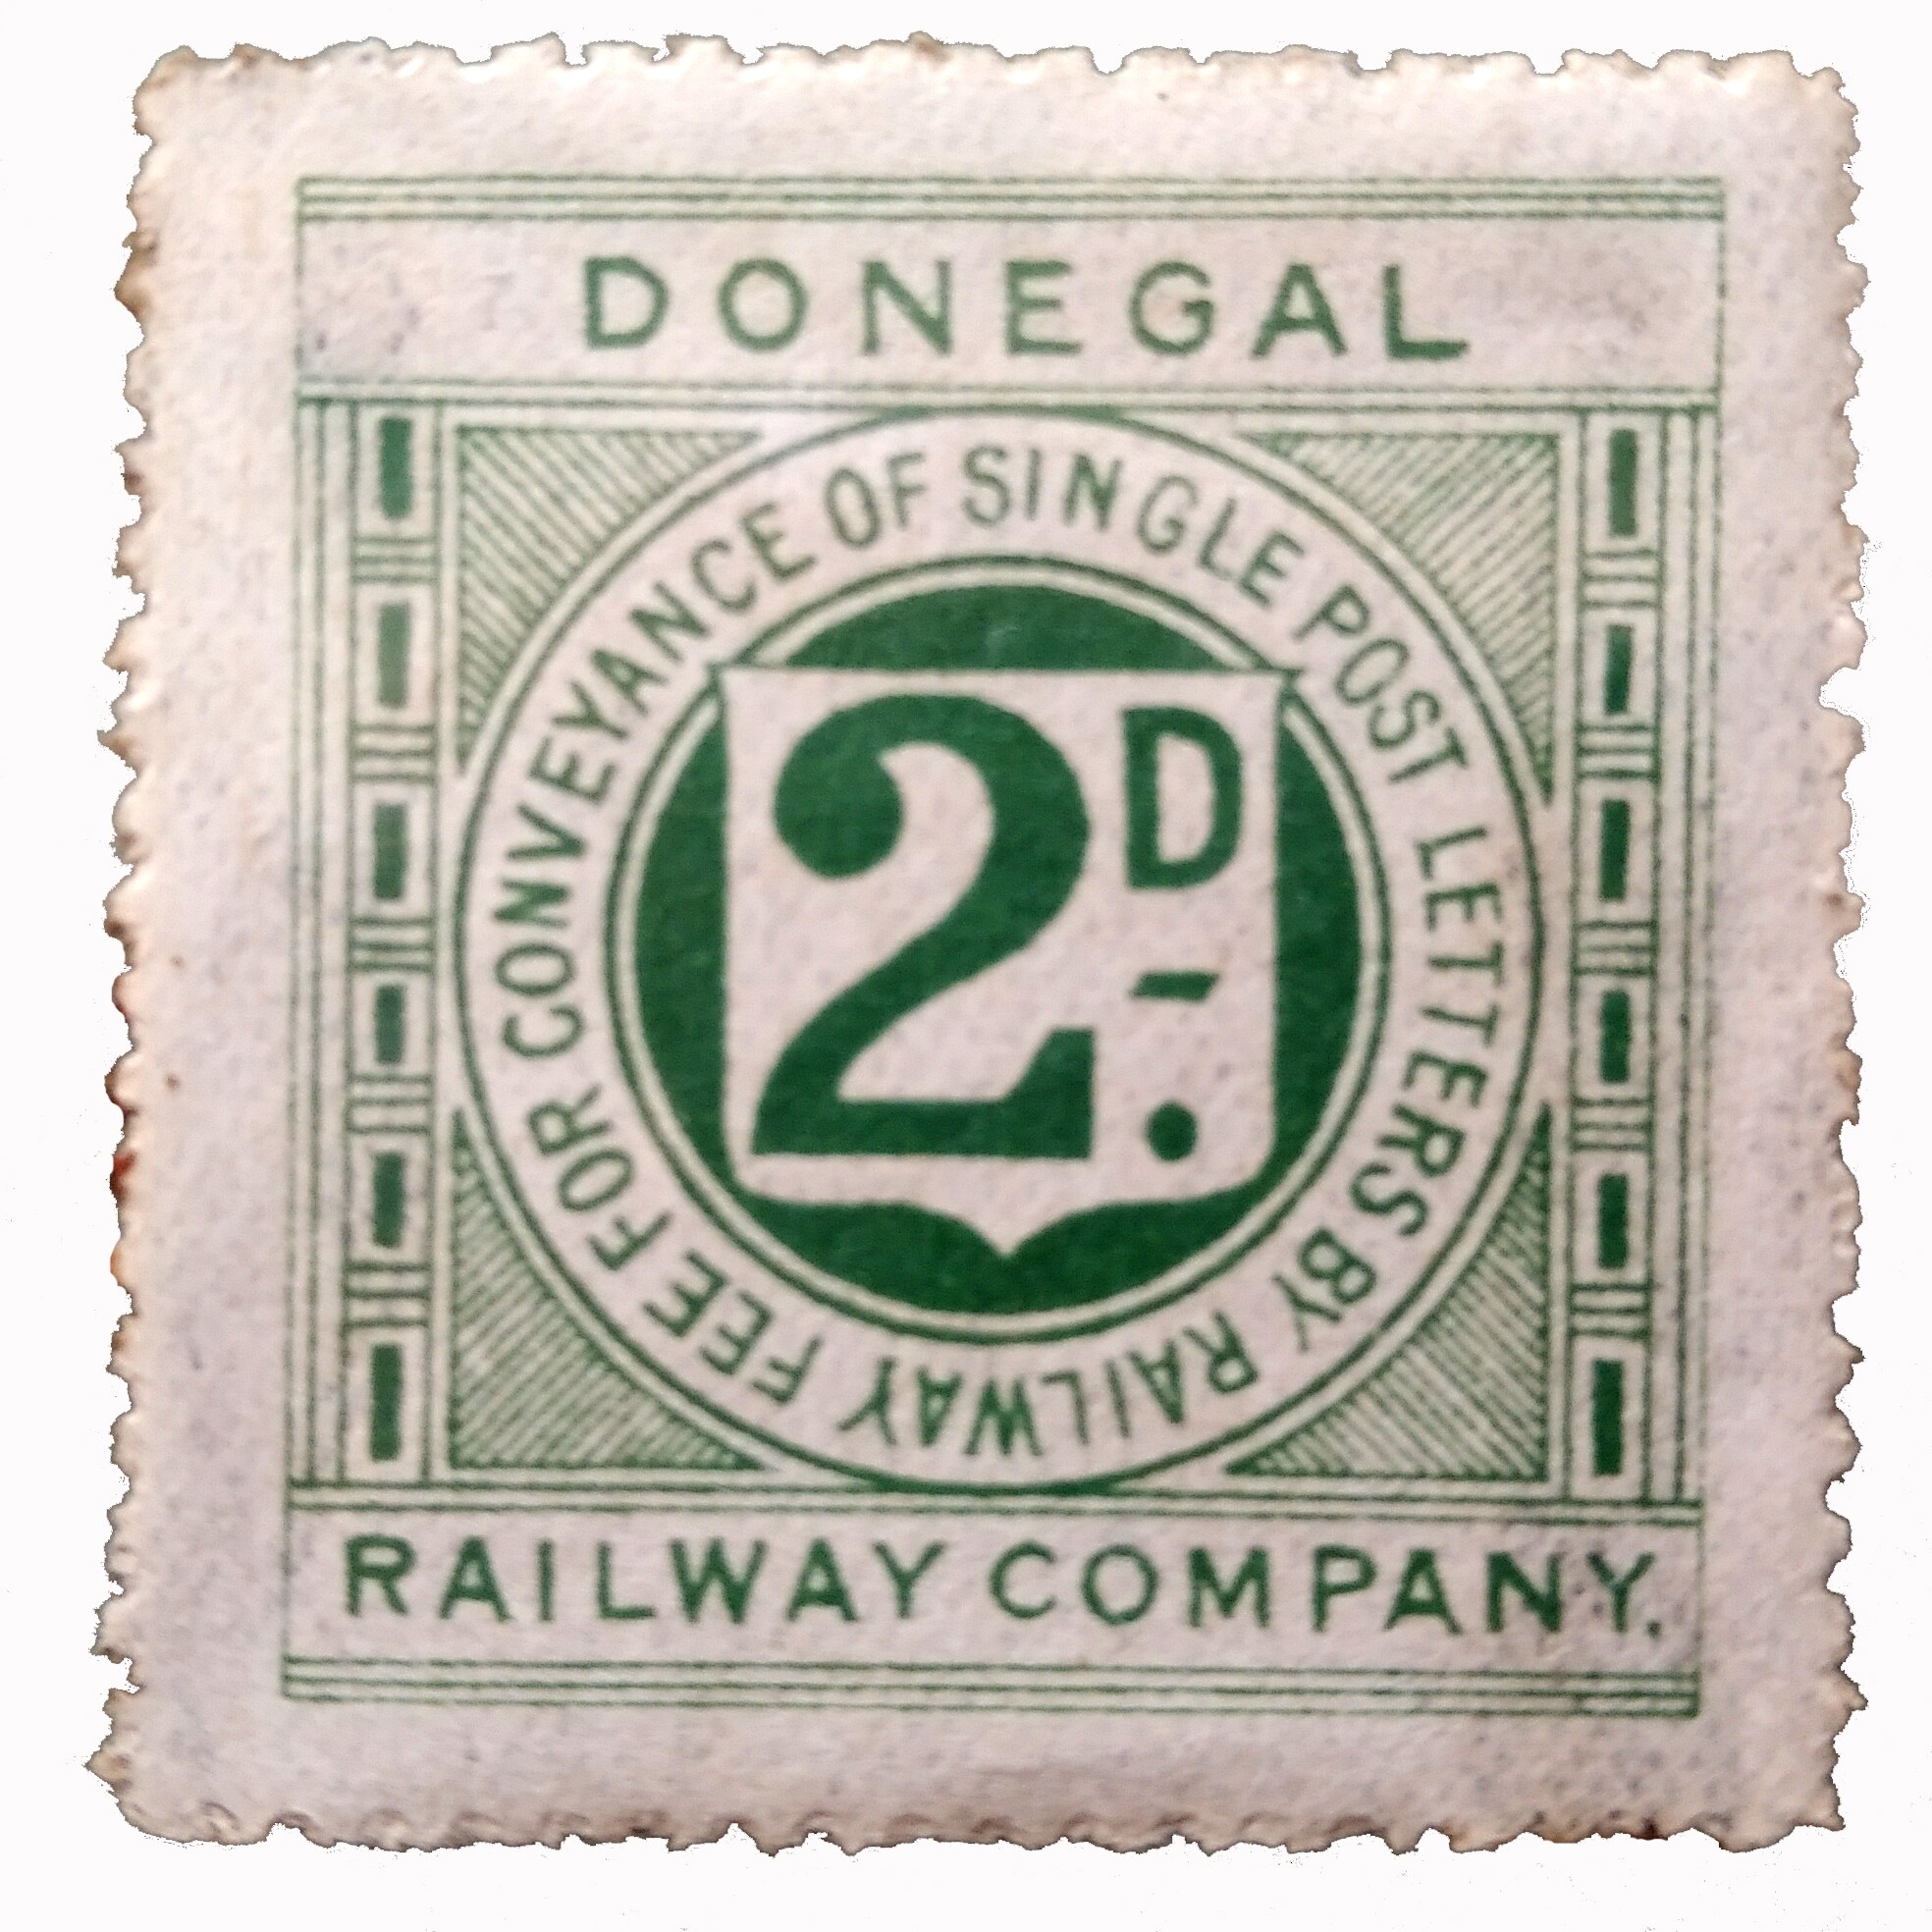 Donegal Railway Company Stamp (Donegal Railway Heritage Center, Heike Thiele CC BY-NC-SA)